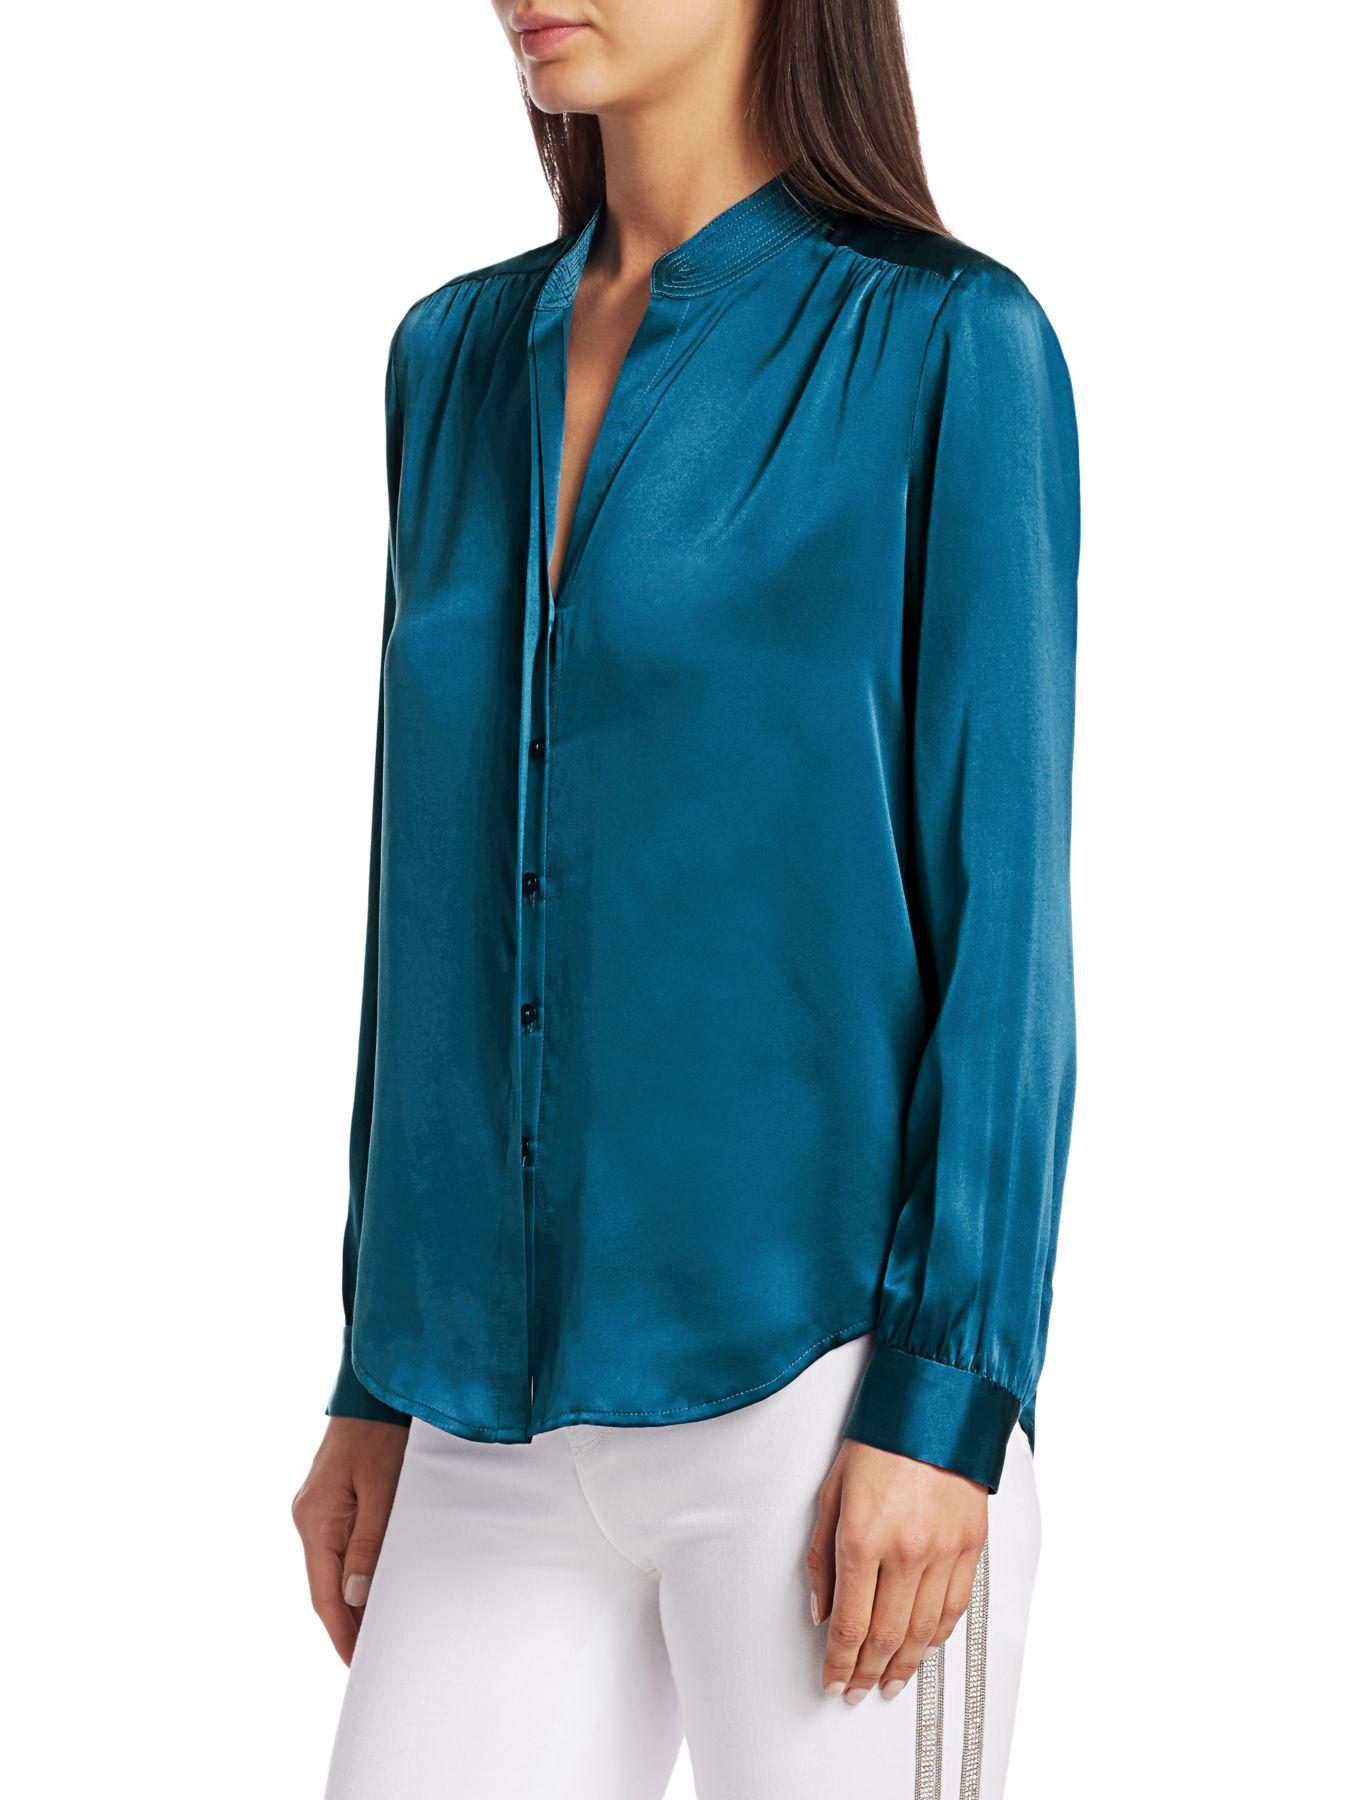 L'Agence Bianca Silk Charmeuse Blouse in Blue - Lyst